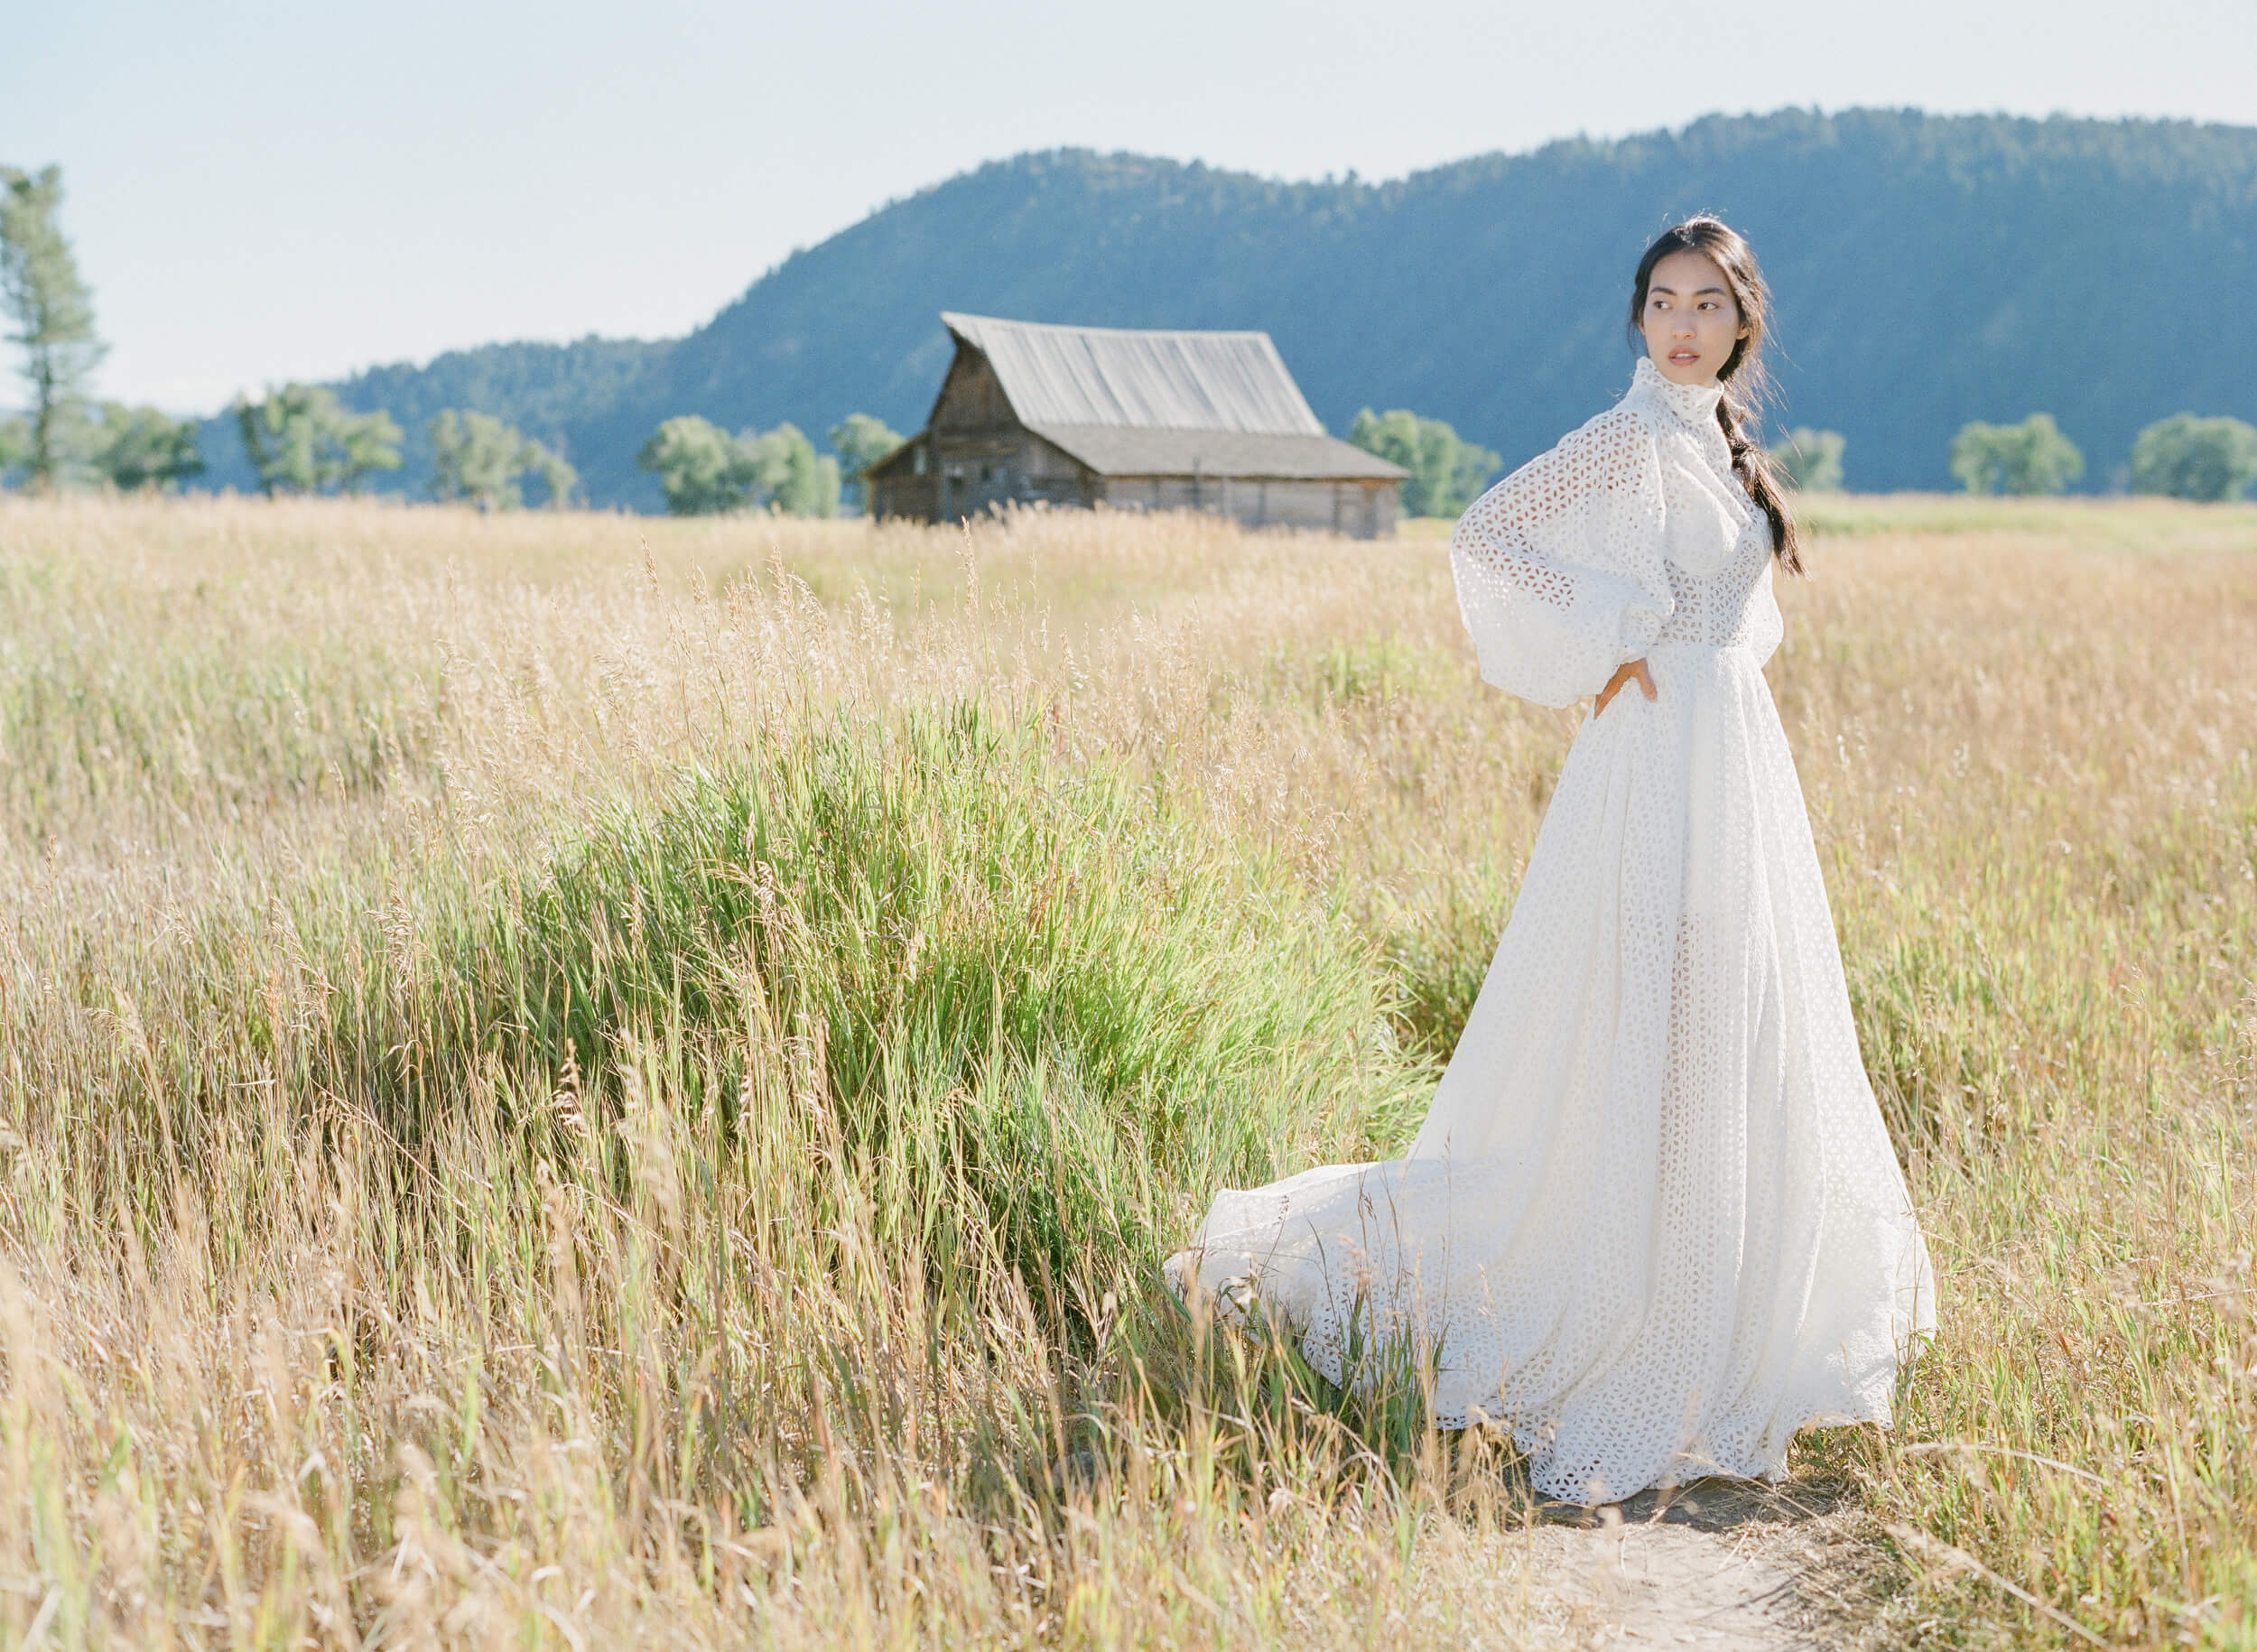 white eyelet long-sleeved gown by Teuta Matoshi